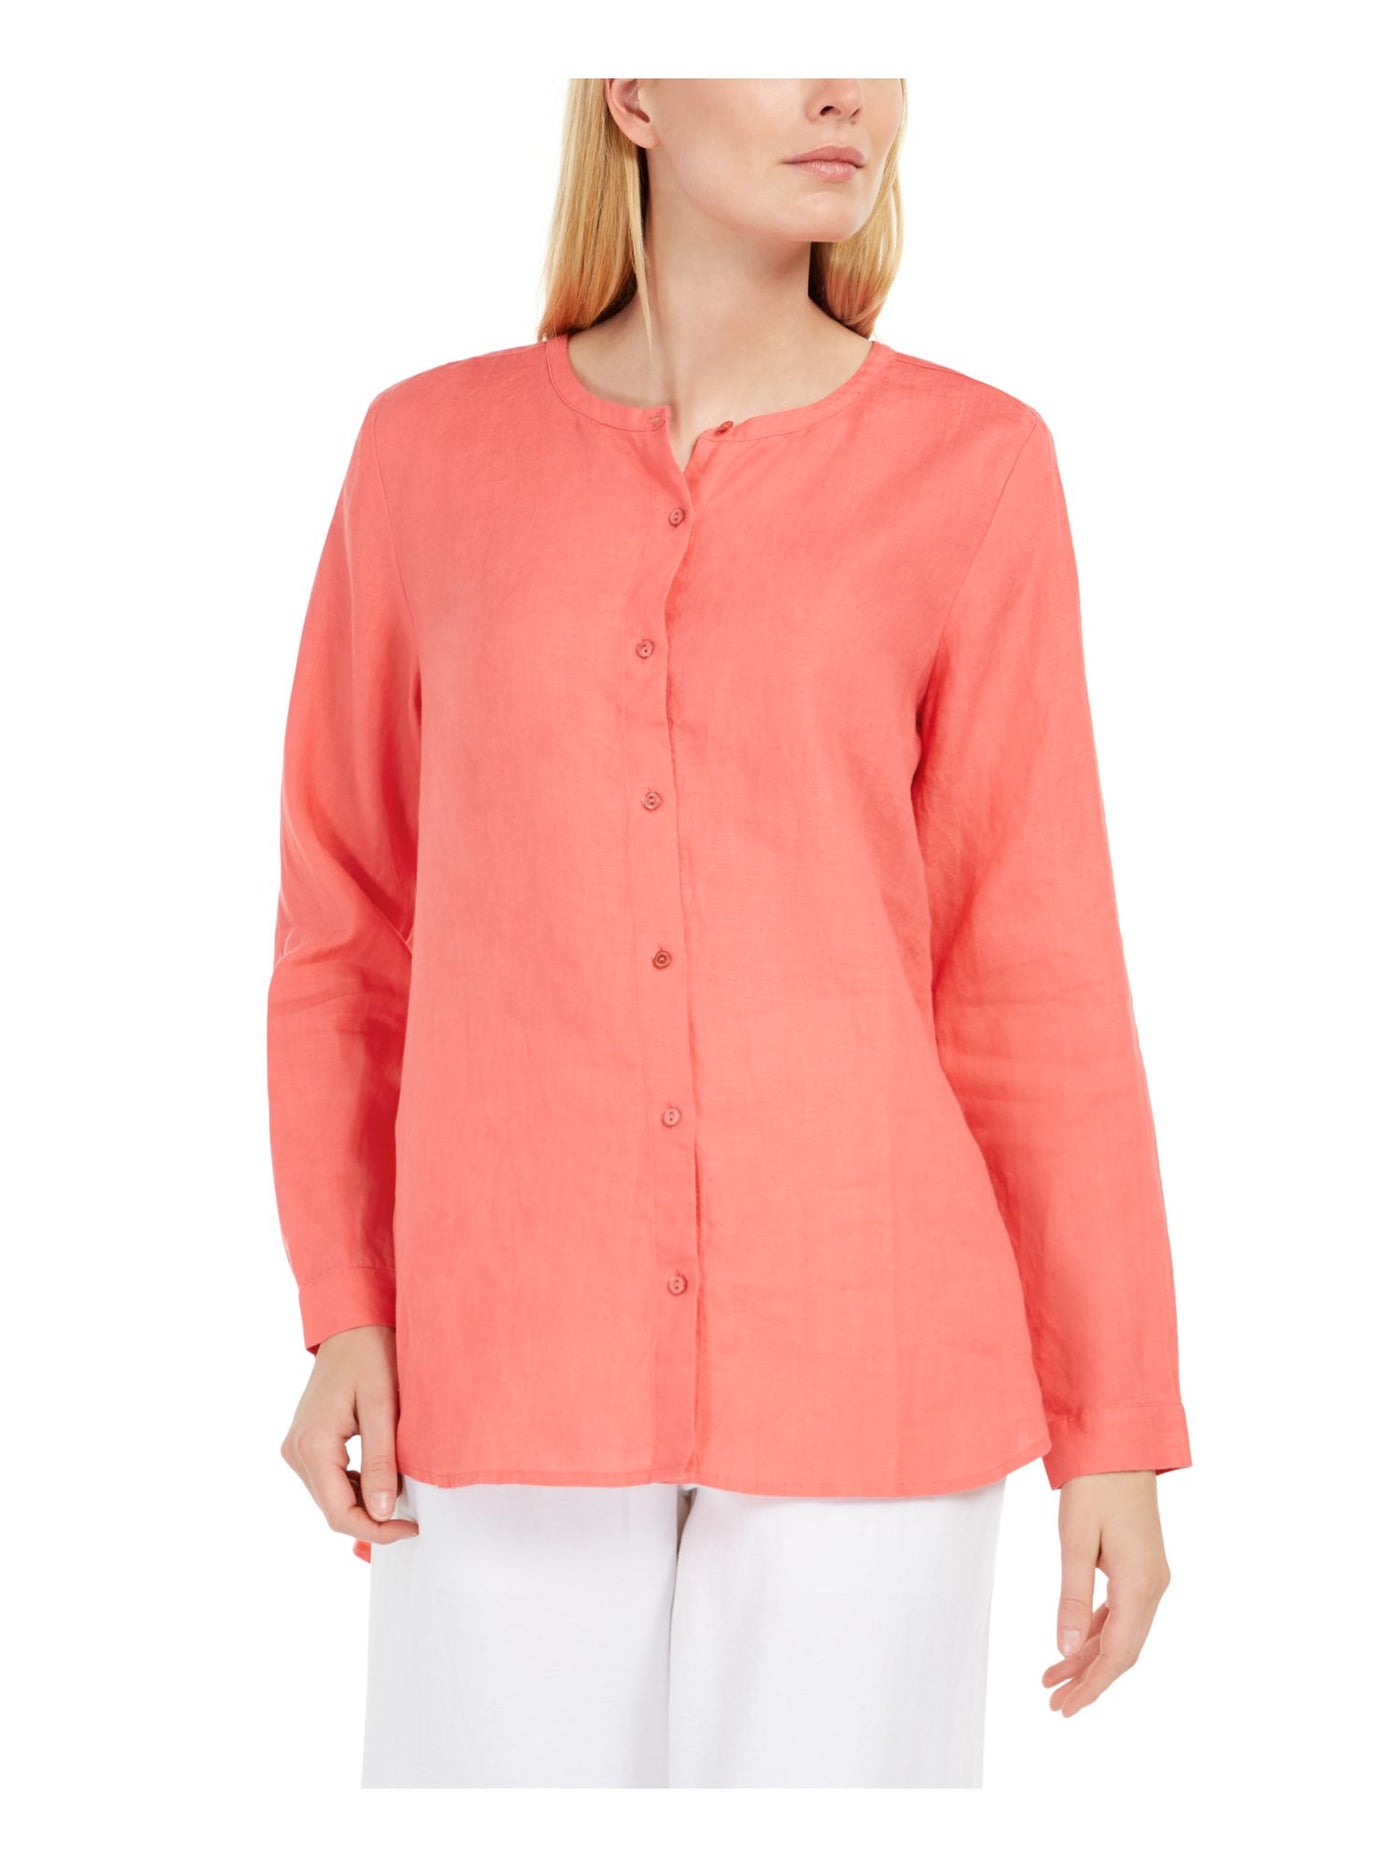 EILEEN FISHER Womens Coral Long Sleeve Jewel Neck Button Up Top XS